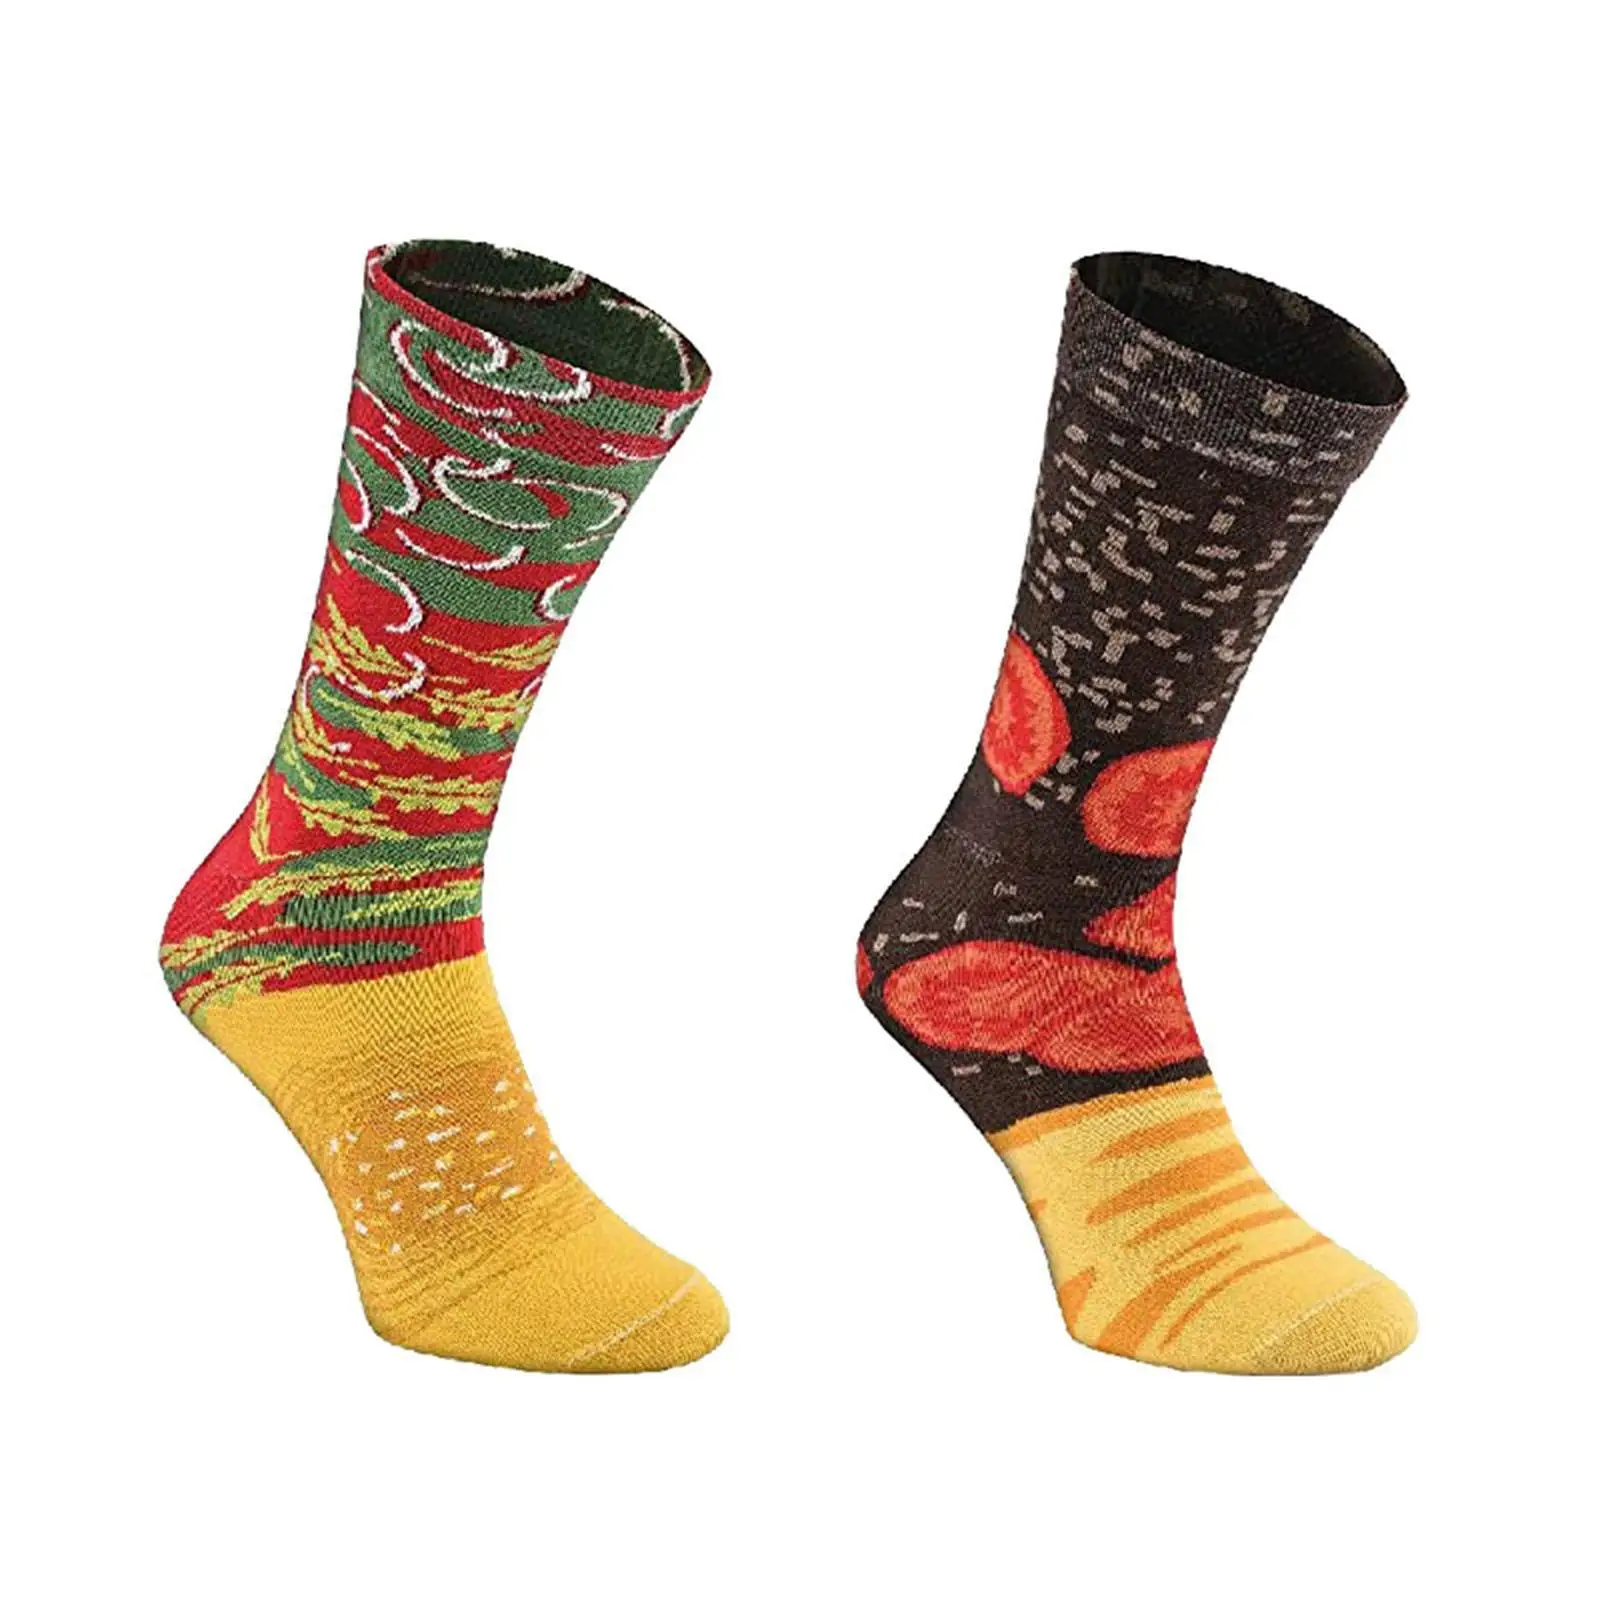 3 Pairs of Ladies Womens Socks Colorful Funny Stretch Casual for Winter Xmas Gifts